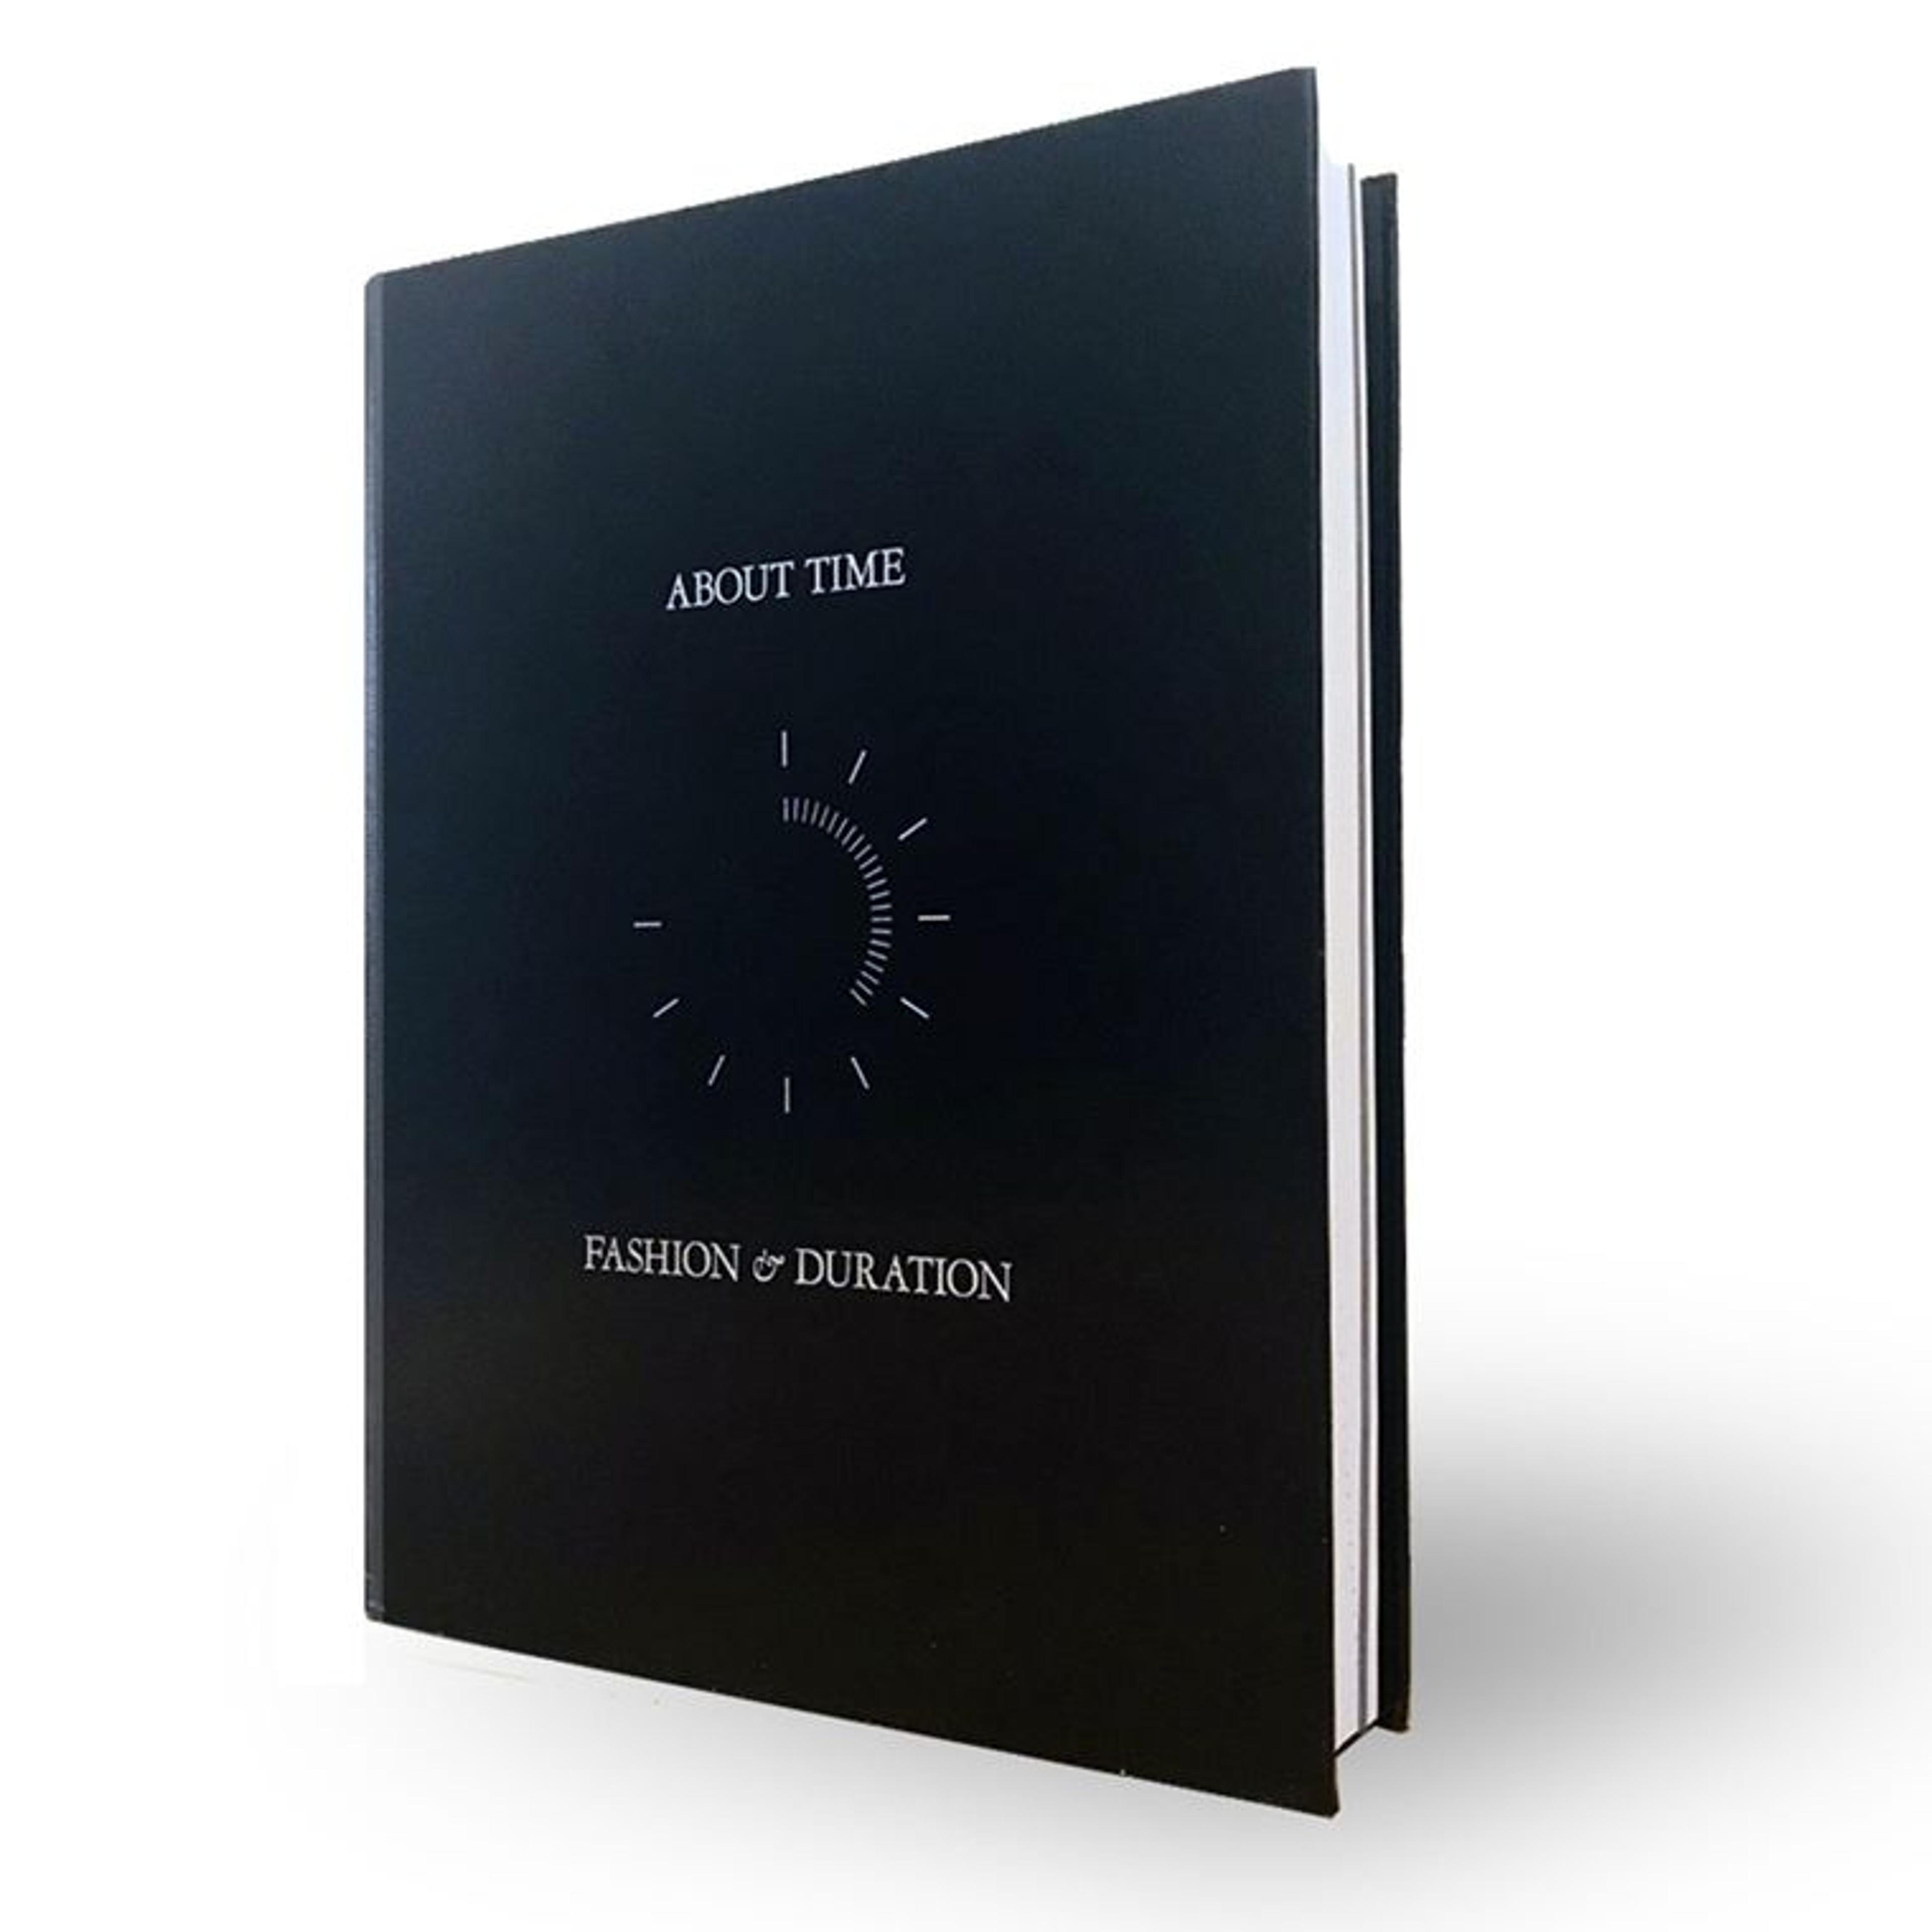 Cover of a black book titled "About Time"